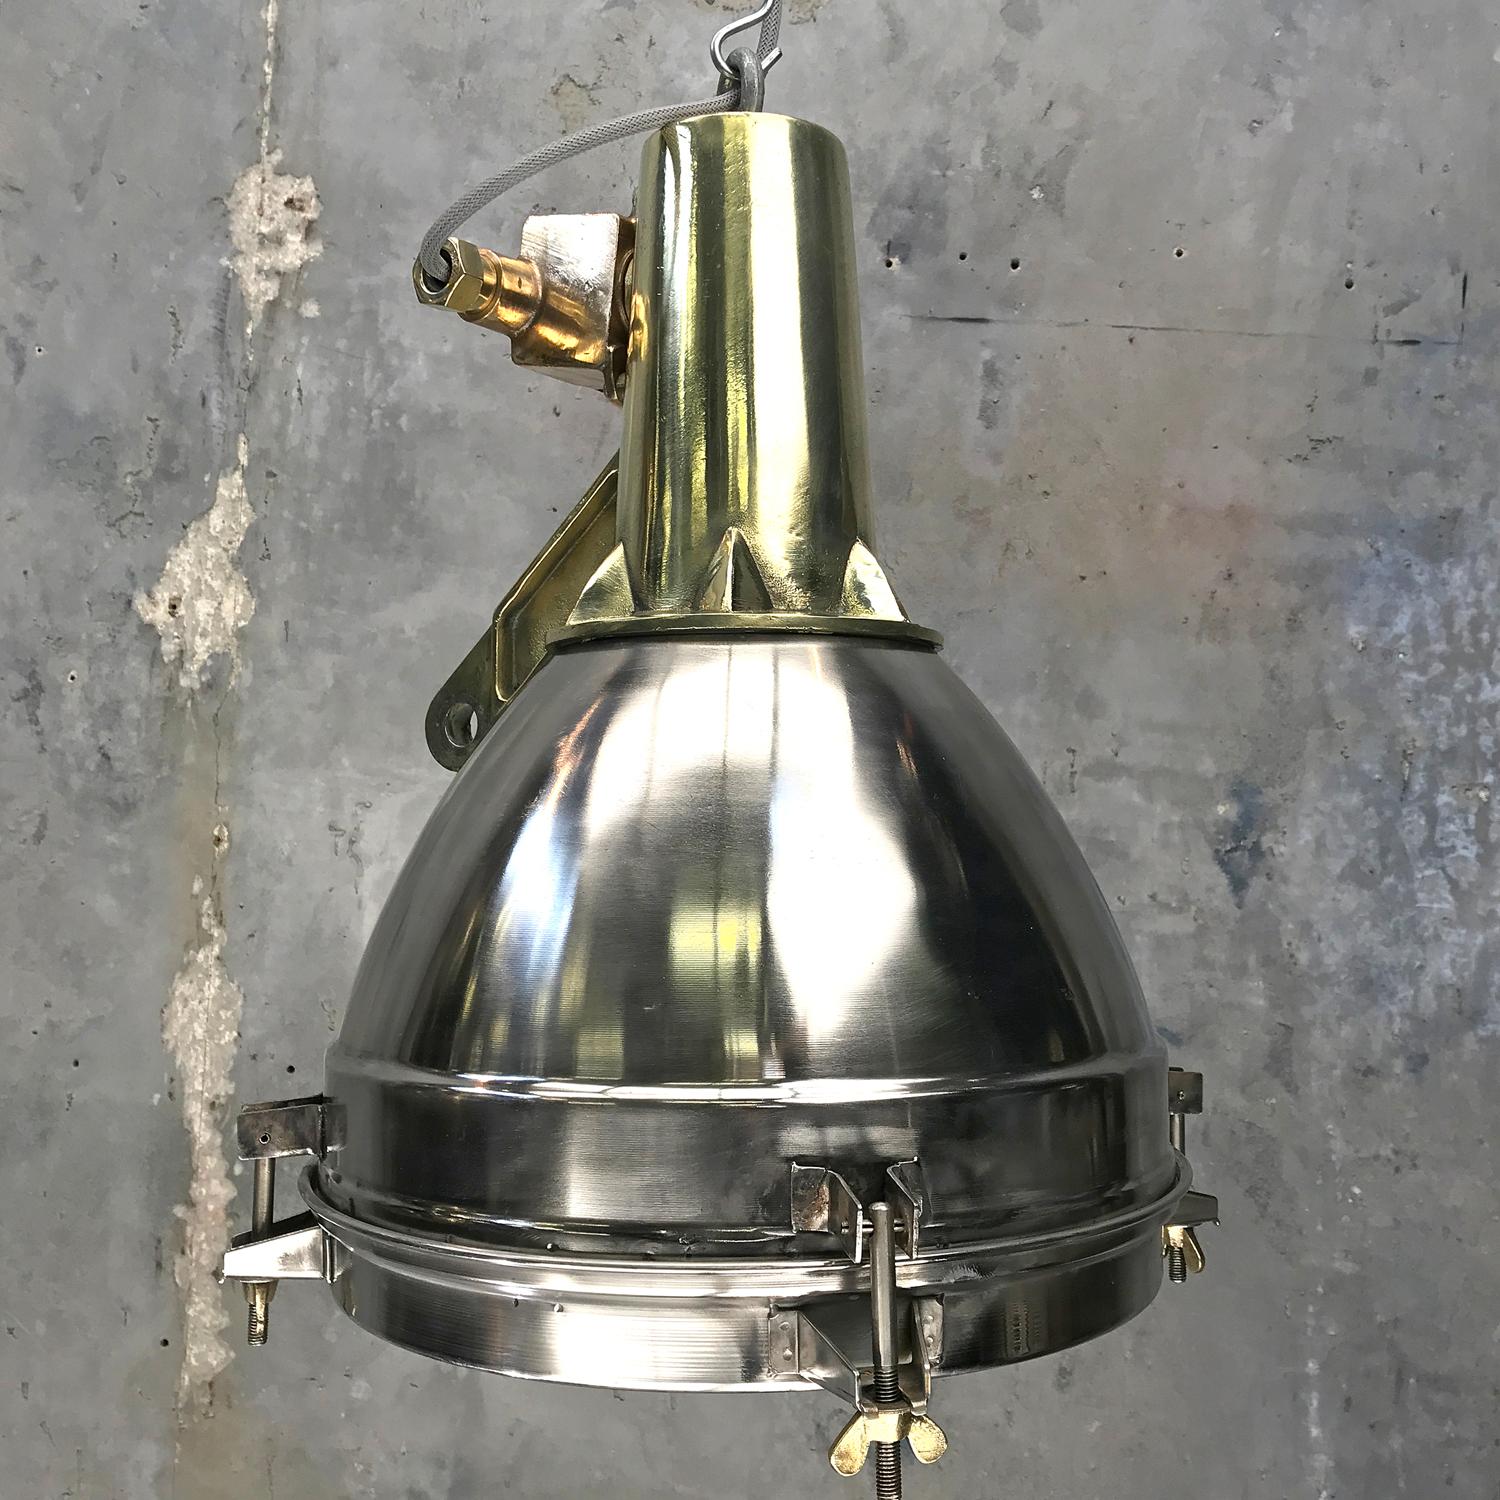 Original stainless steel, cast brass and bronze search light pendant conversion
 
This very substantial fitting was salvaged from an old Japanese cargo ship, built during the 1970’s and is of outstanding build quality.
 
The stainless dome is